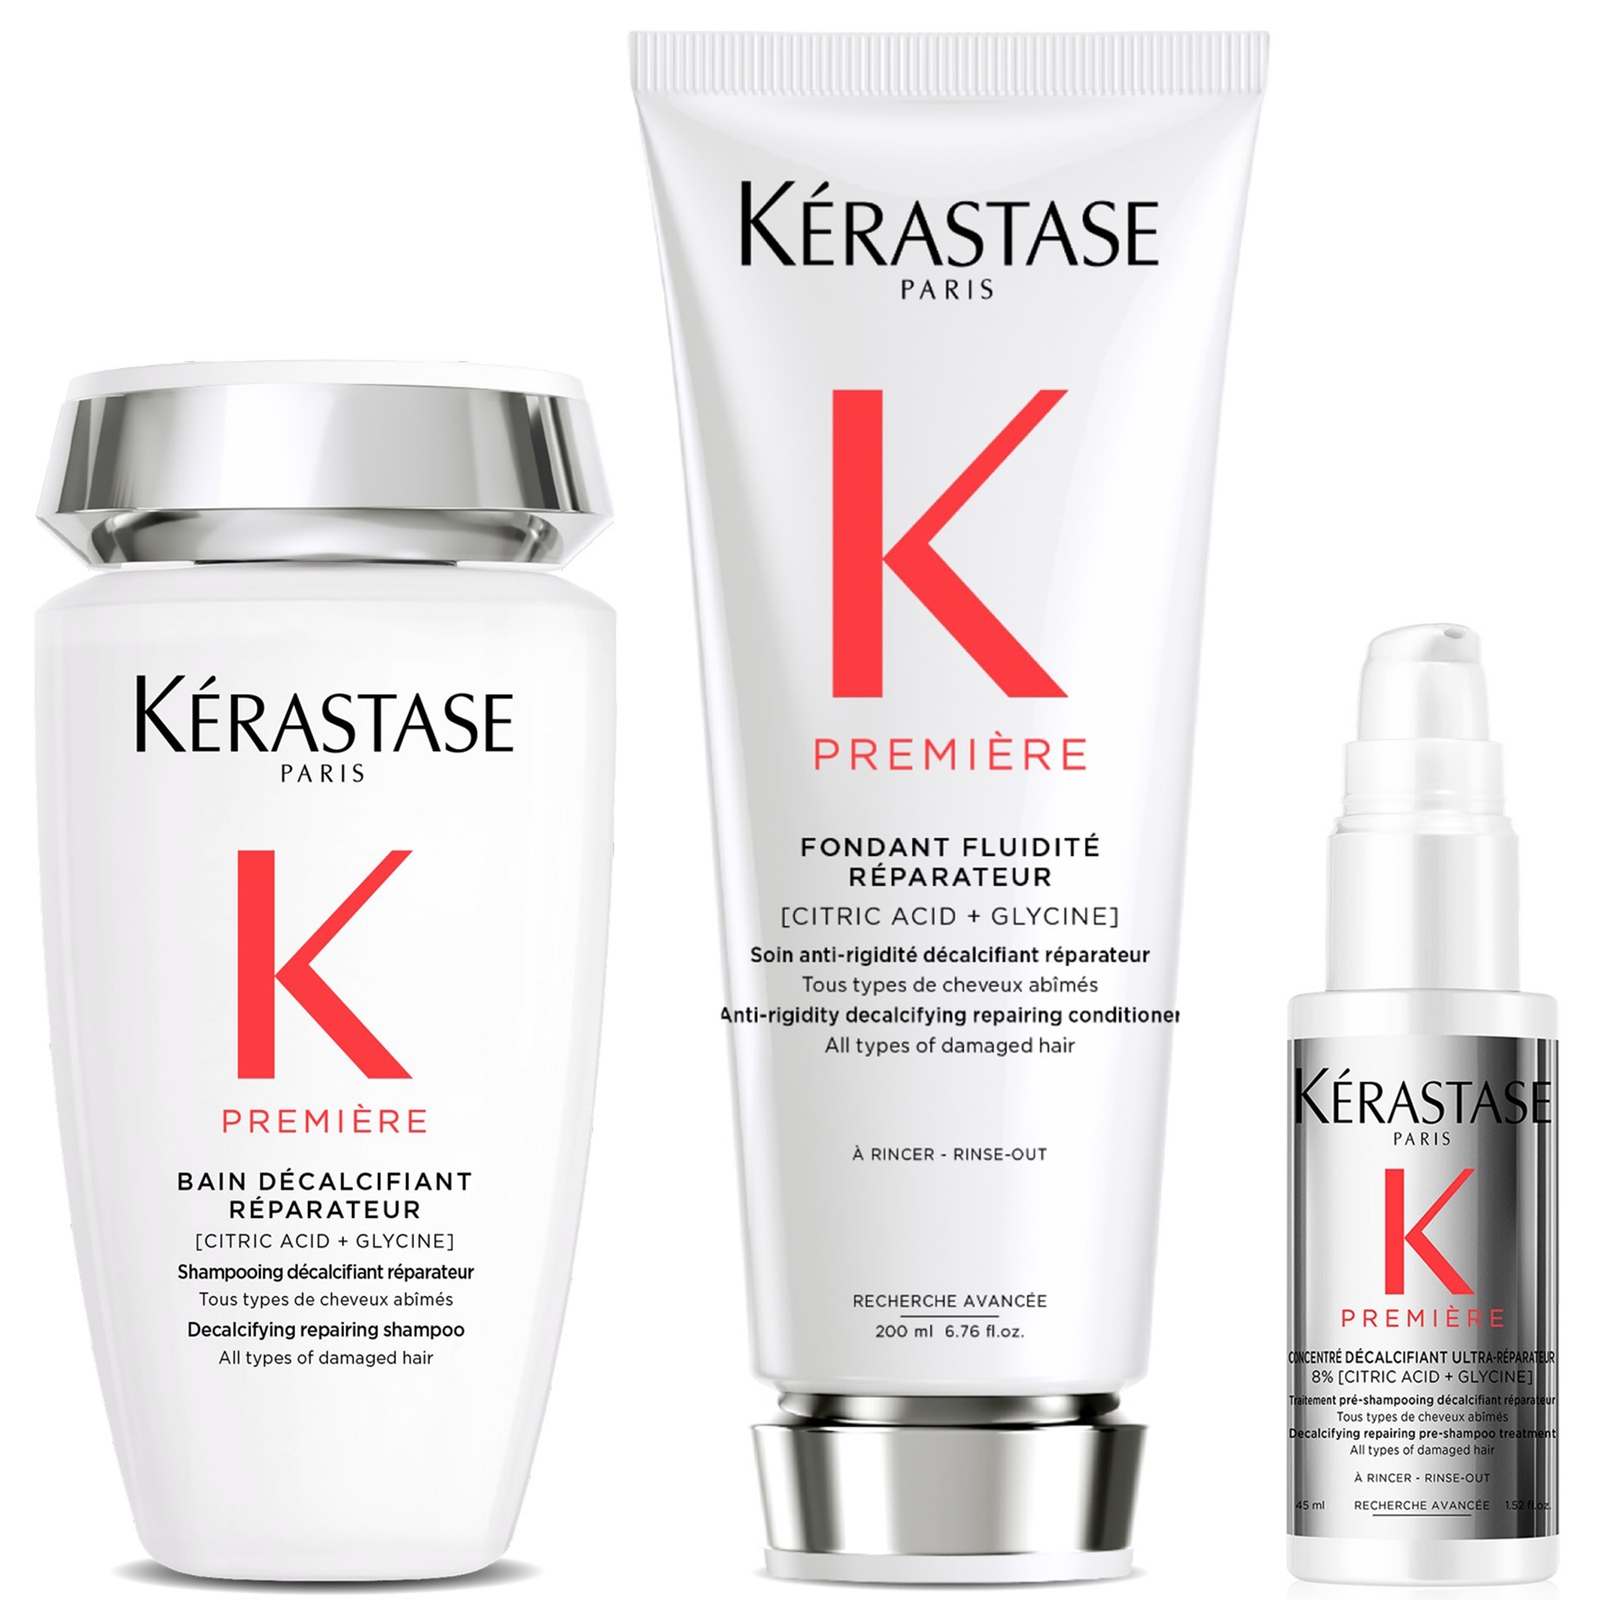 Kerastase Premiere Decalcifying Shampoo and Conditioner Duo with Travel Size Pre-Shampoo for Damaged